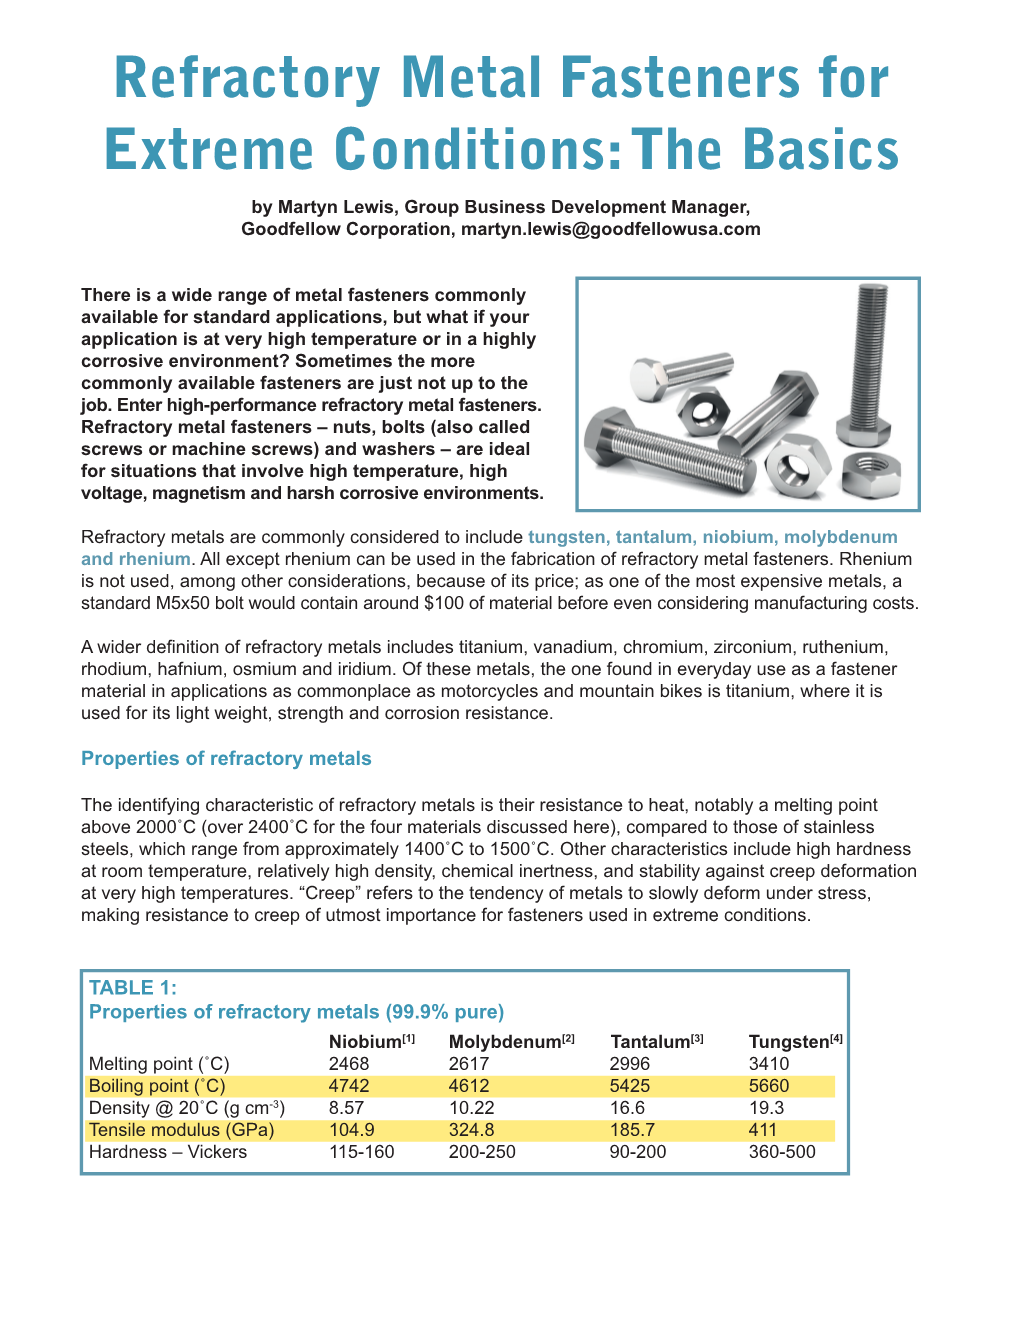 Refractory Metal Fasteners for Extreme Conditions: the Basics